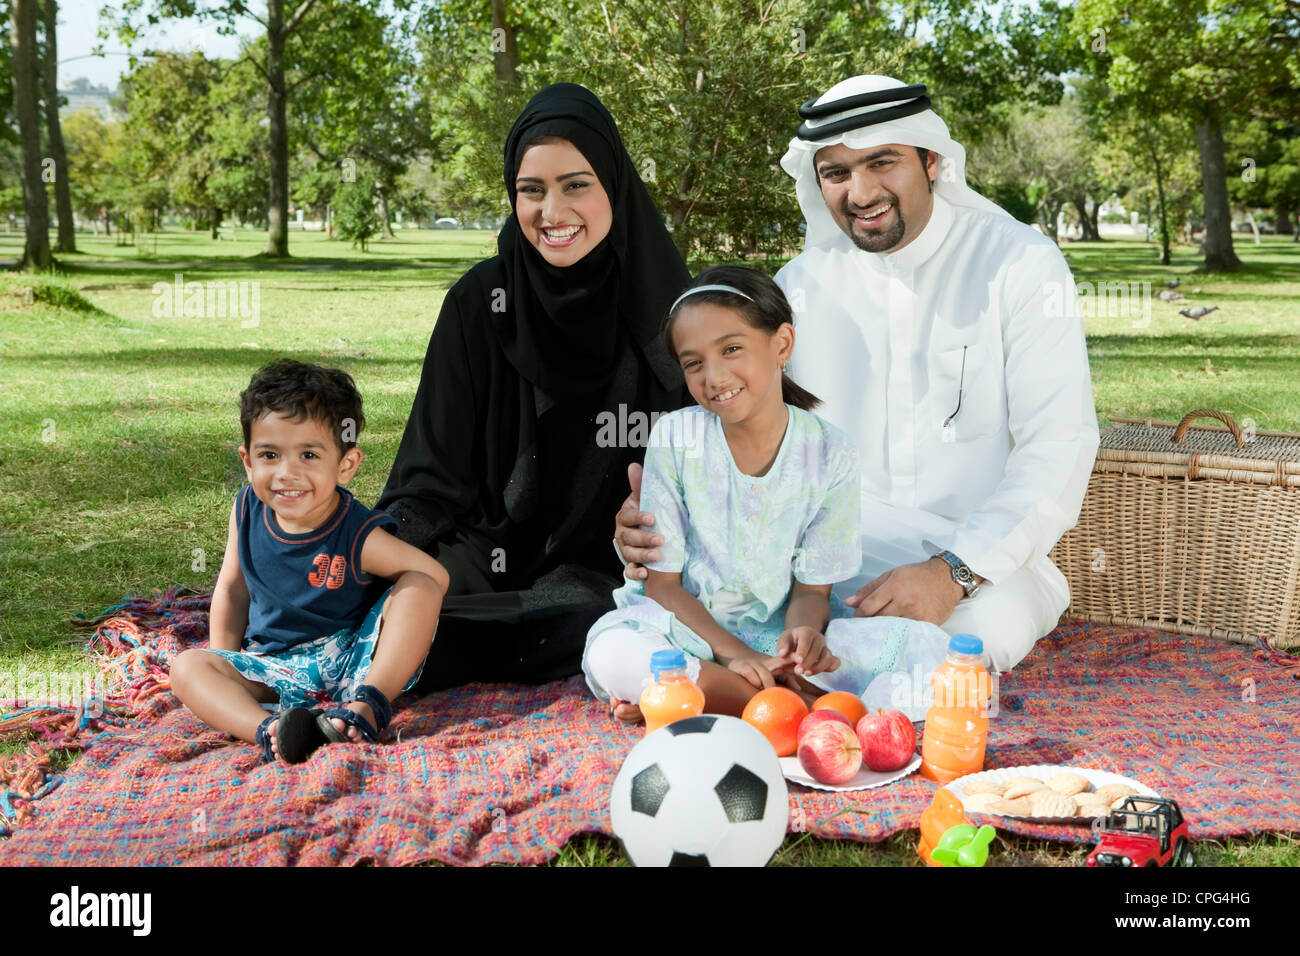 Portrait of arab family in the park, smiling. Stock Photo